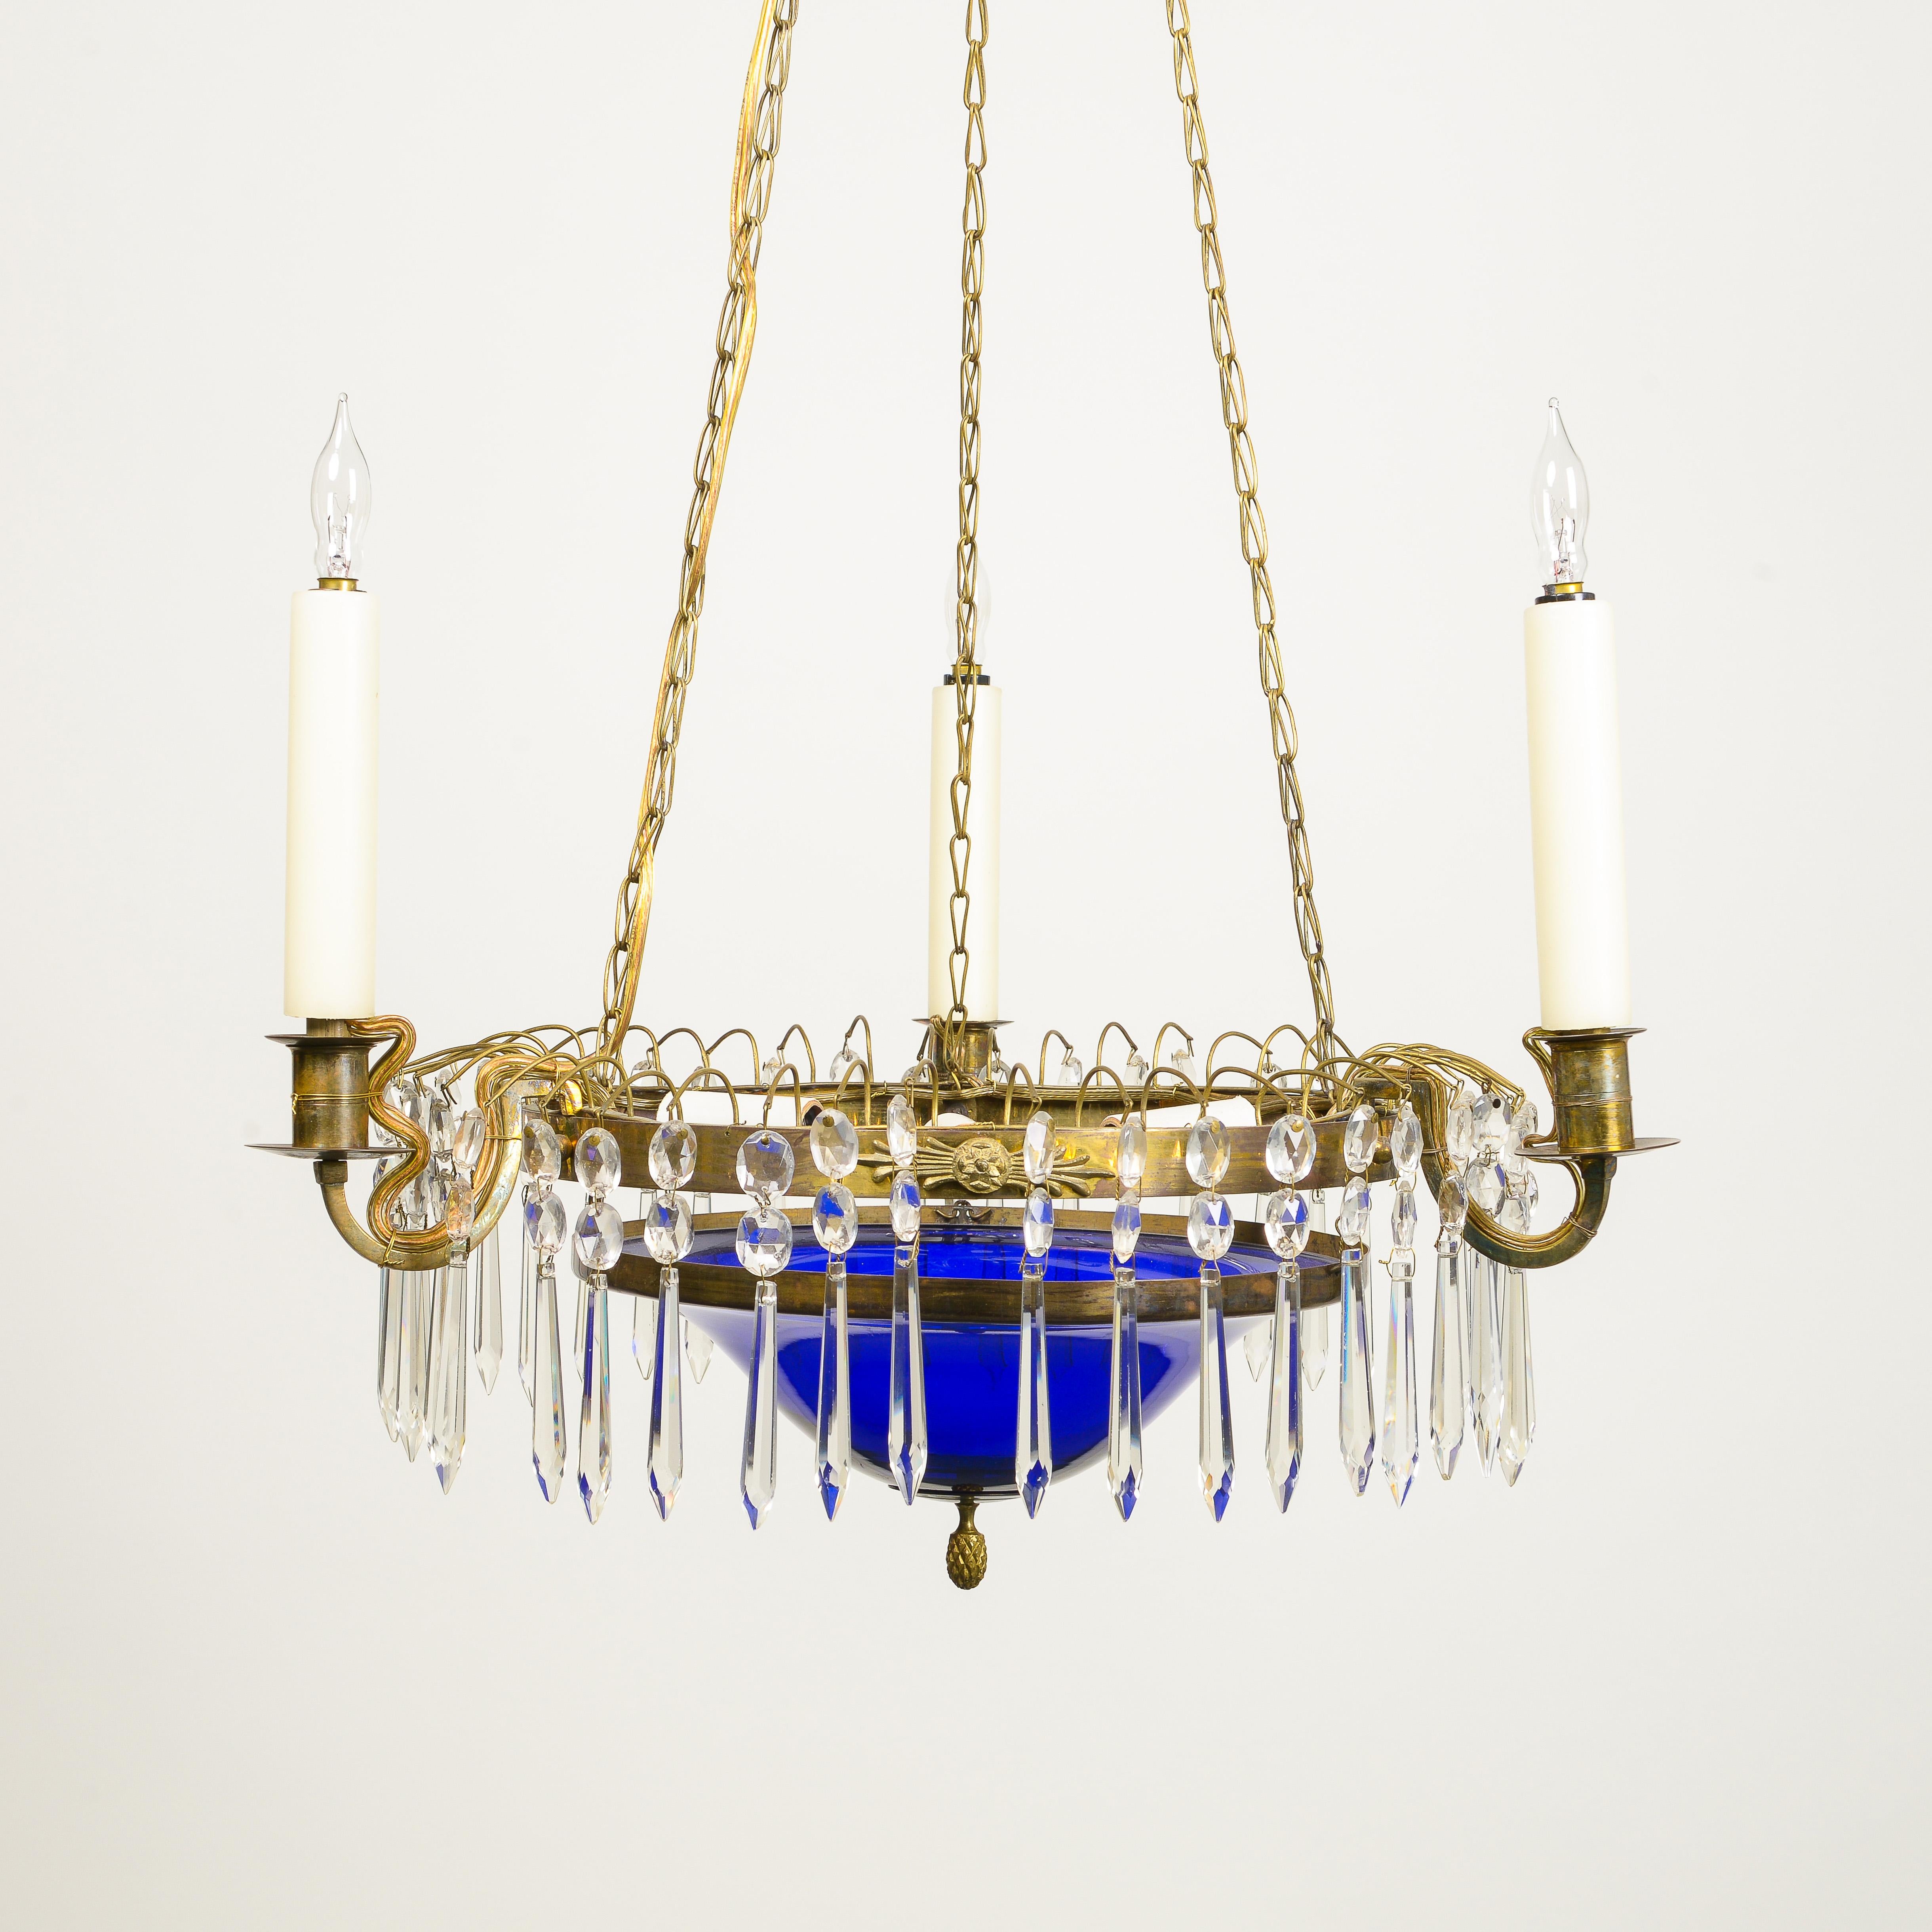 With round cobalt glass bowl trimmed in gilt bronzel banding and issuing three electrified candlearms; suspended by three gilt-bronze chains hung from a disk issuing sprays of cut glass pendants. With three bulb sockets to the interior; requires 5